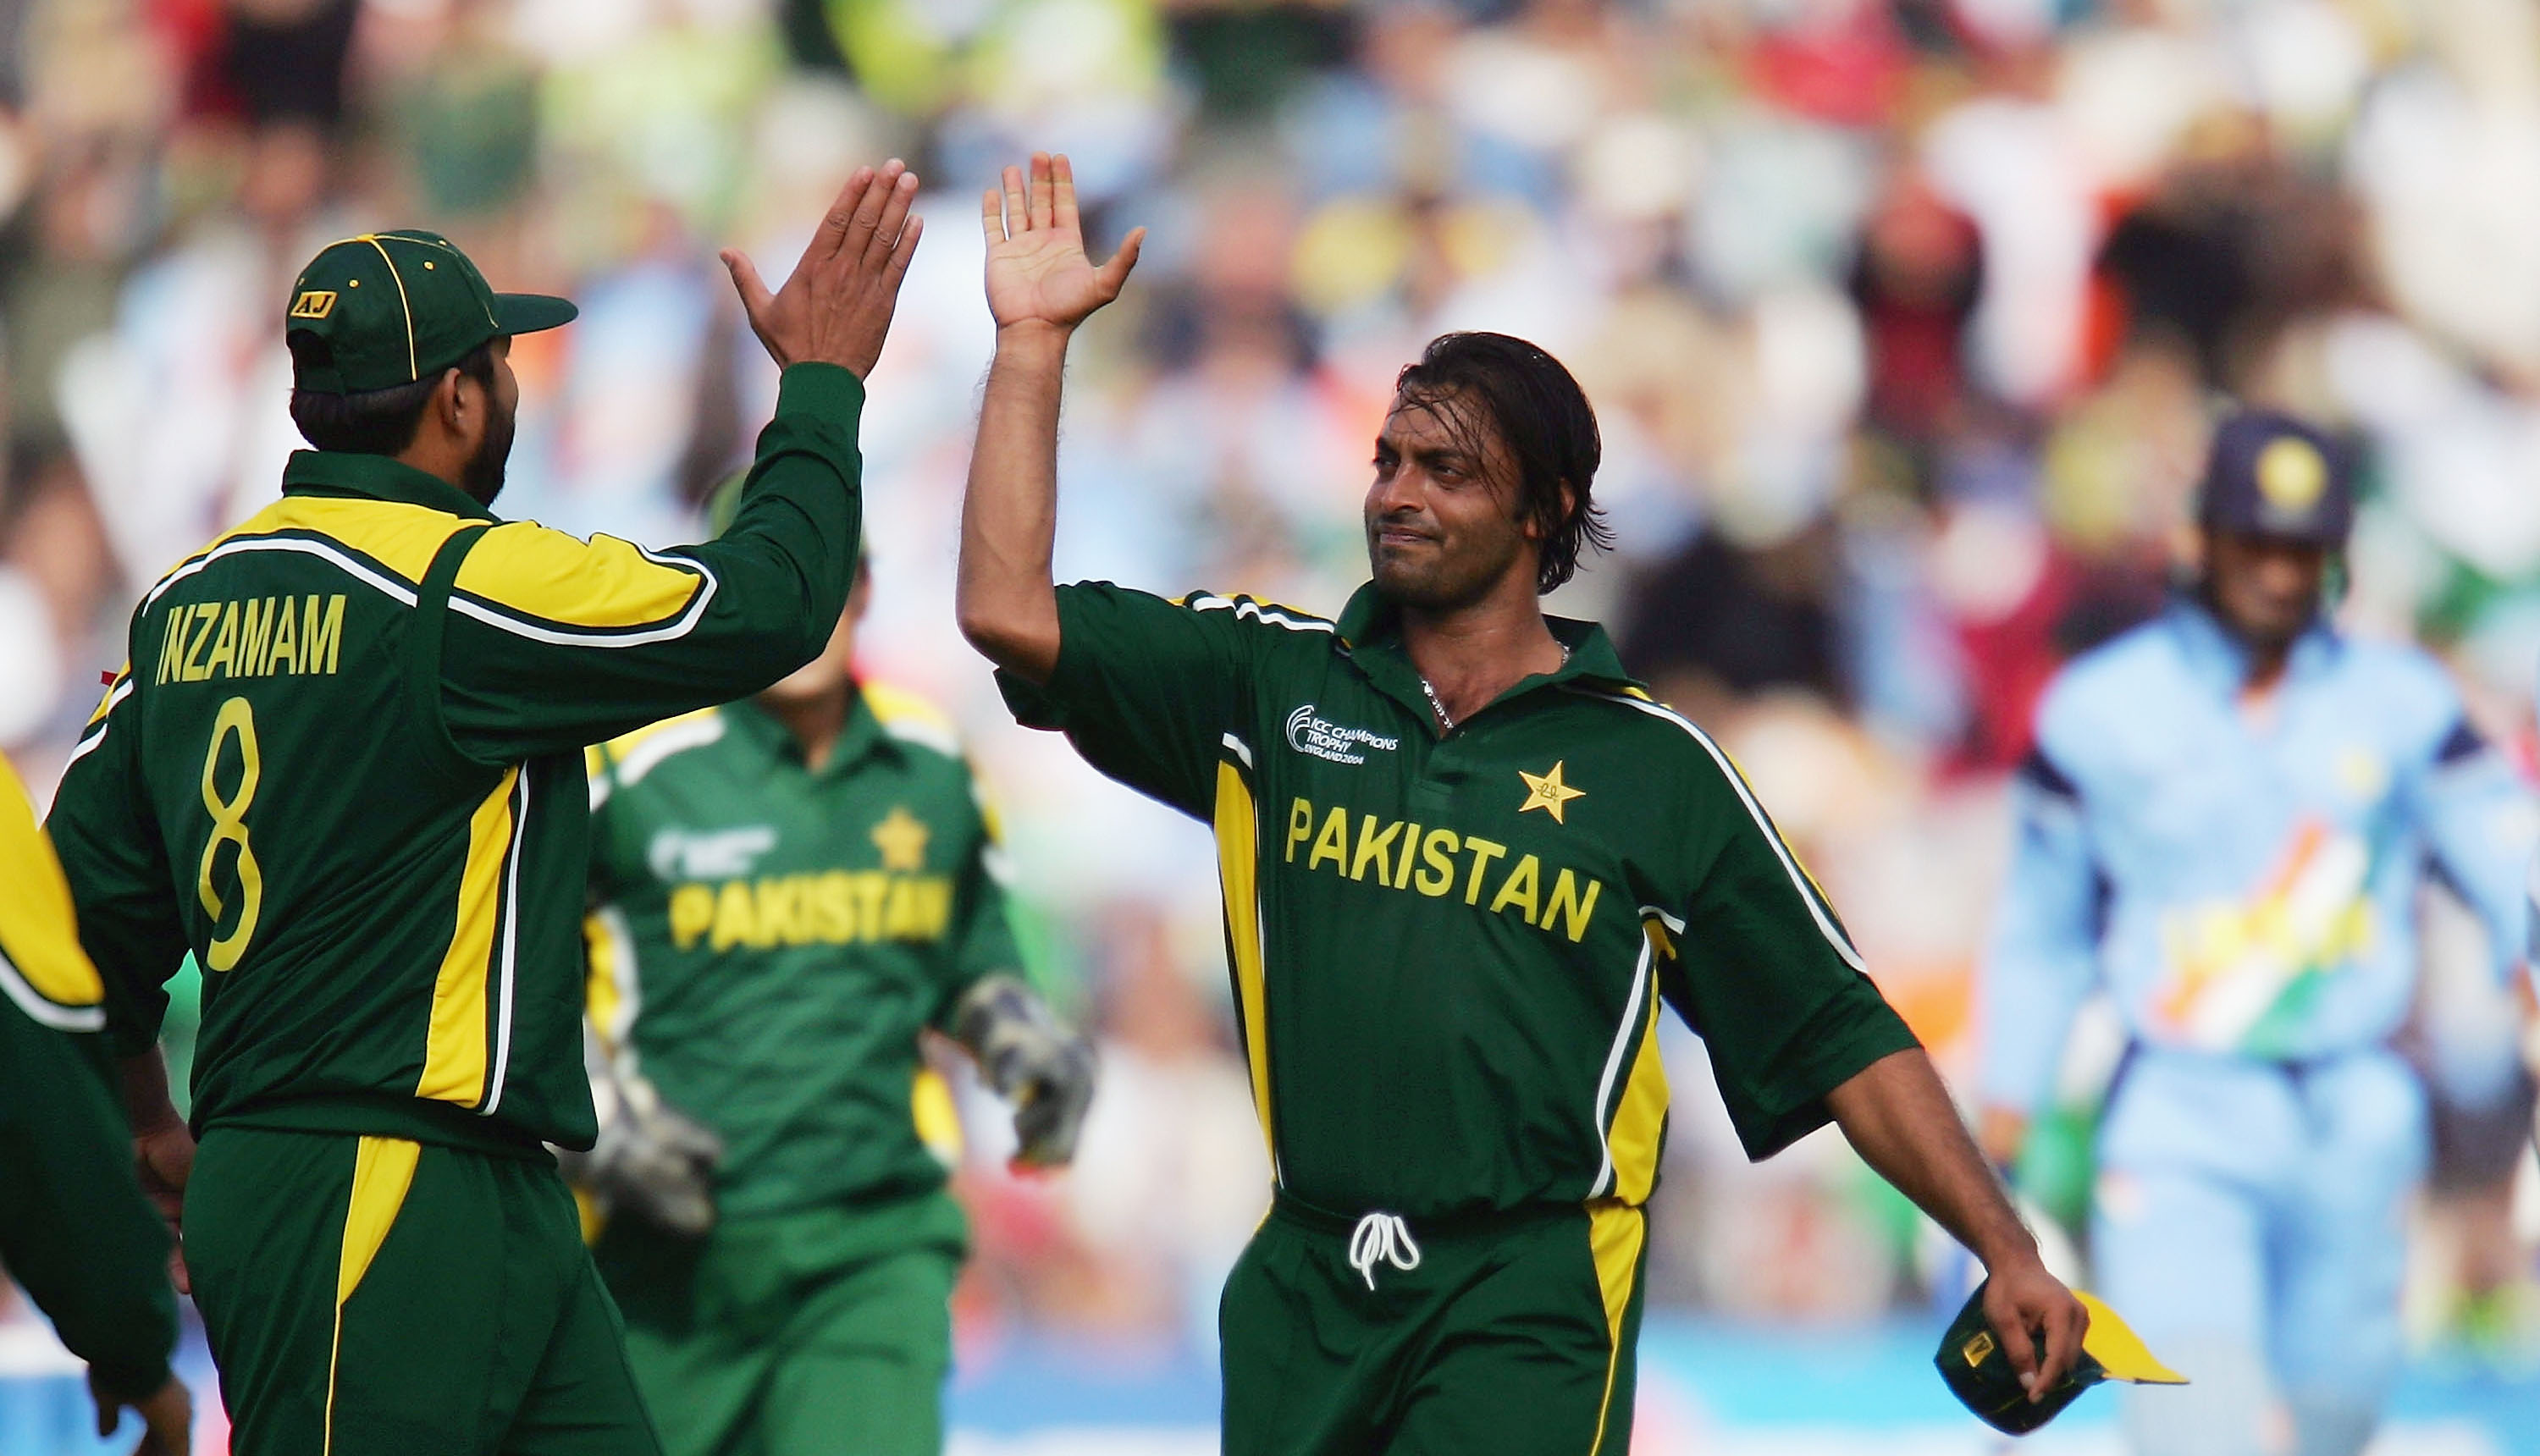 Shoaib Akhtar names the best batsman he has bowled to - and it's not Sachin